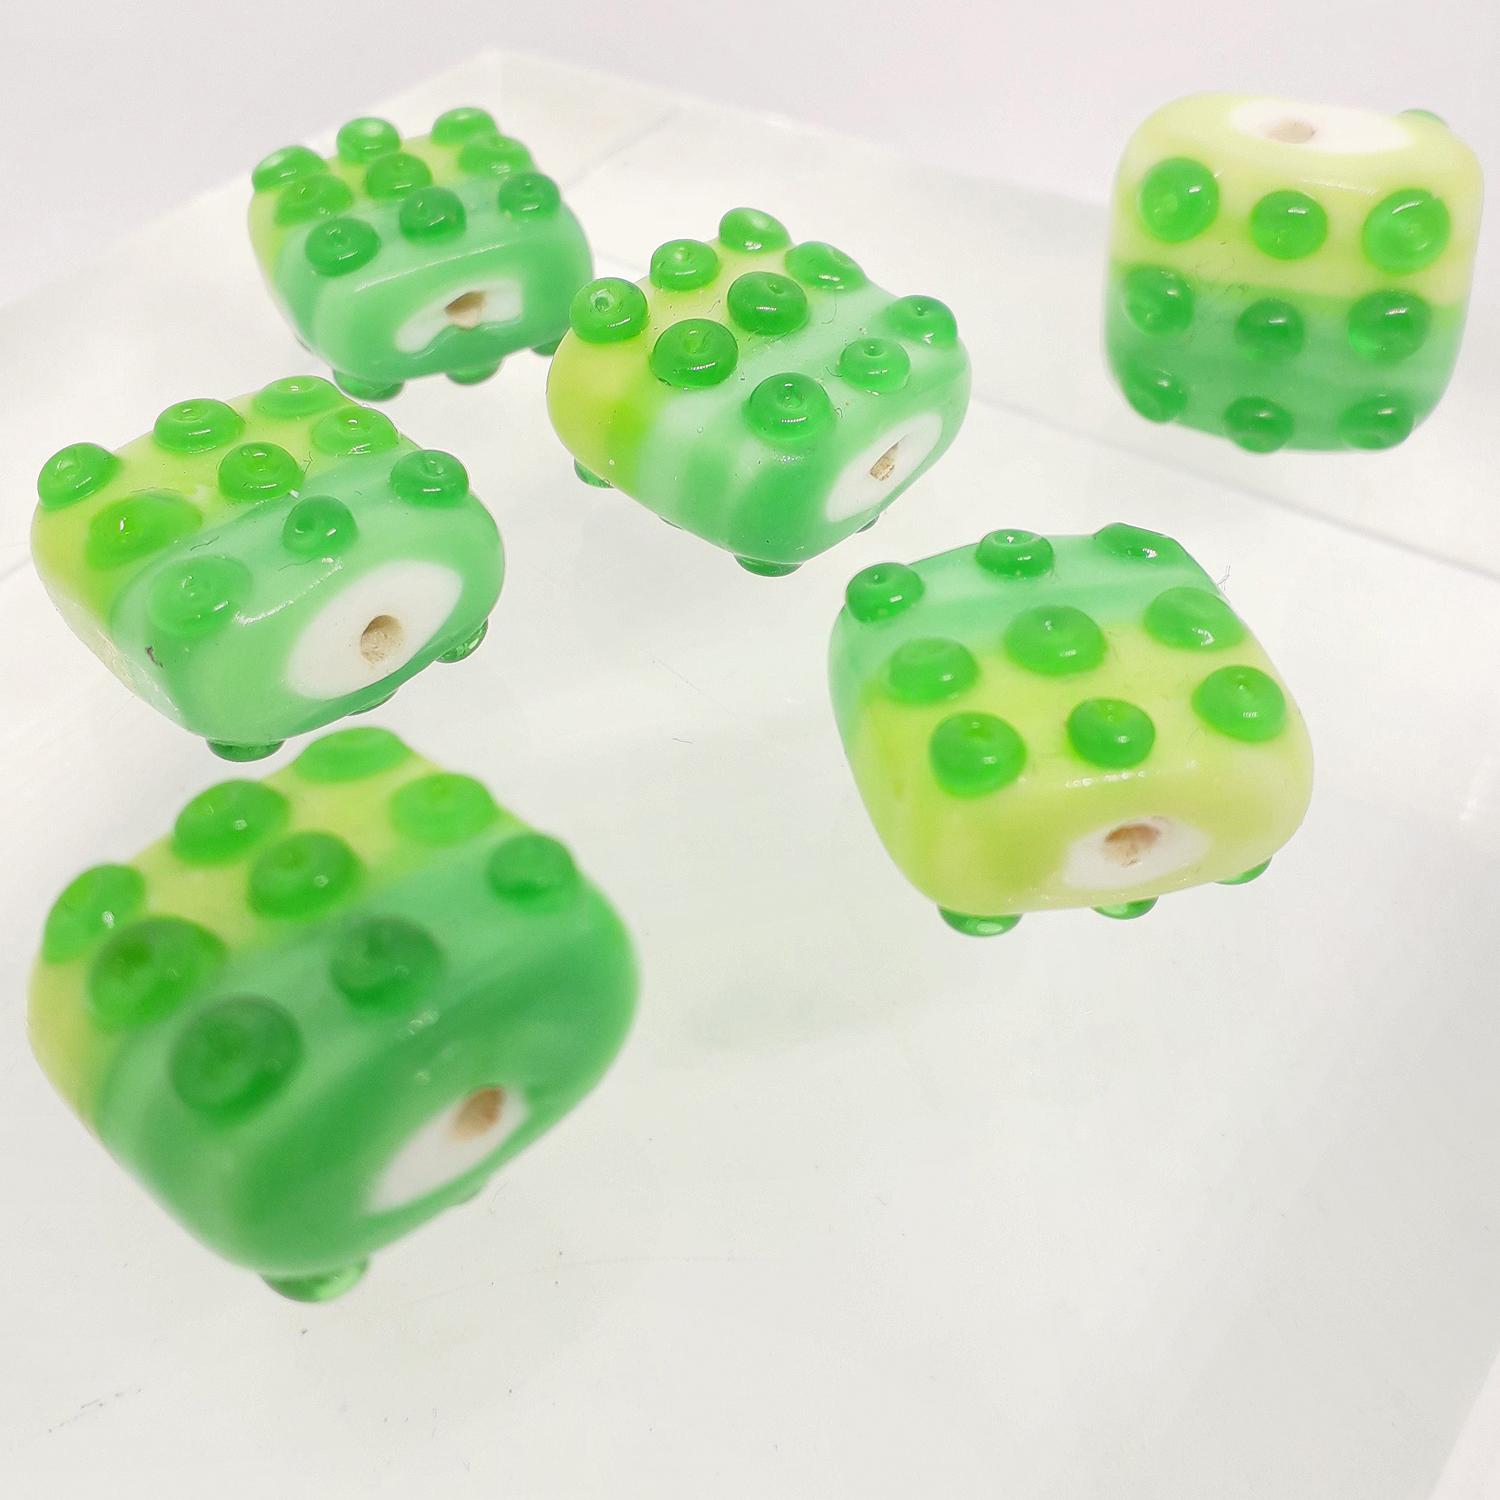 14mm Shaded Green Square Glass Bead with Raised Dot Pattern